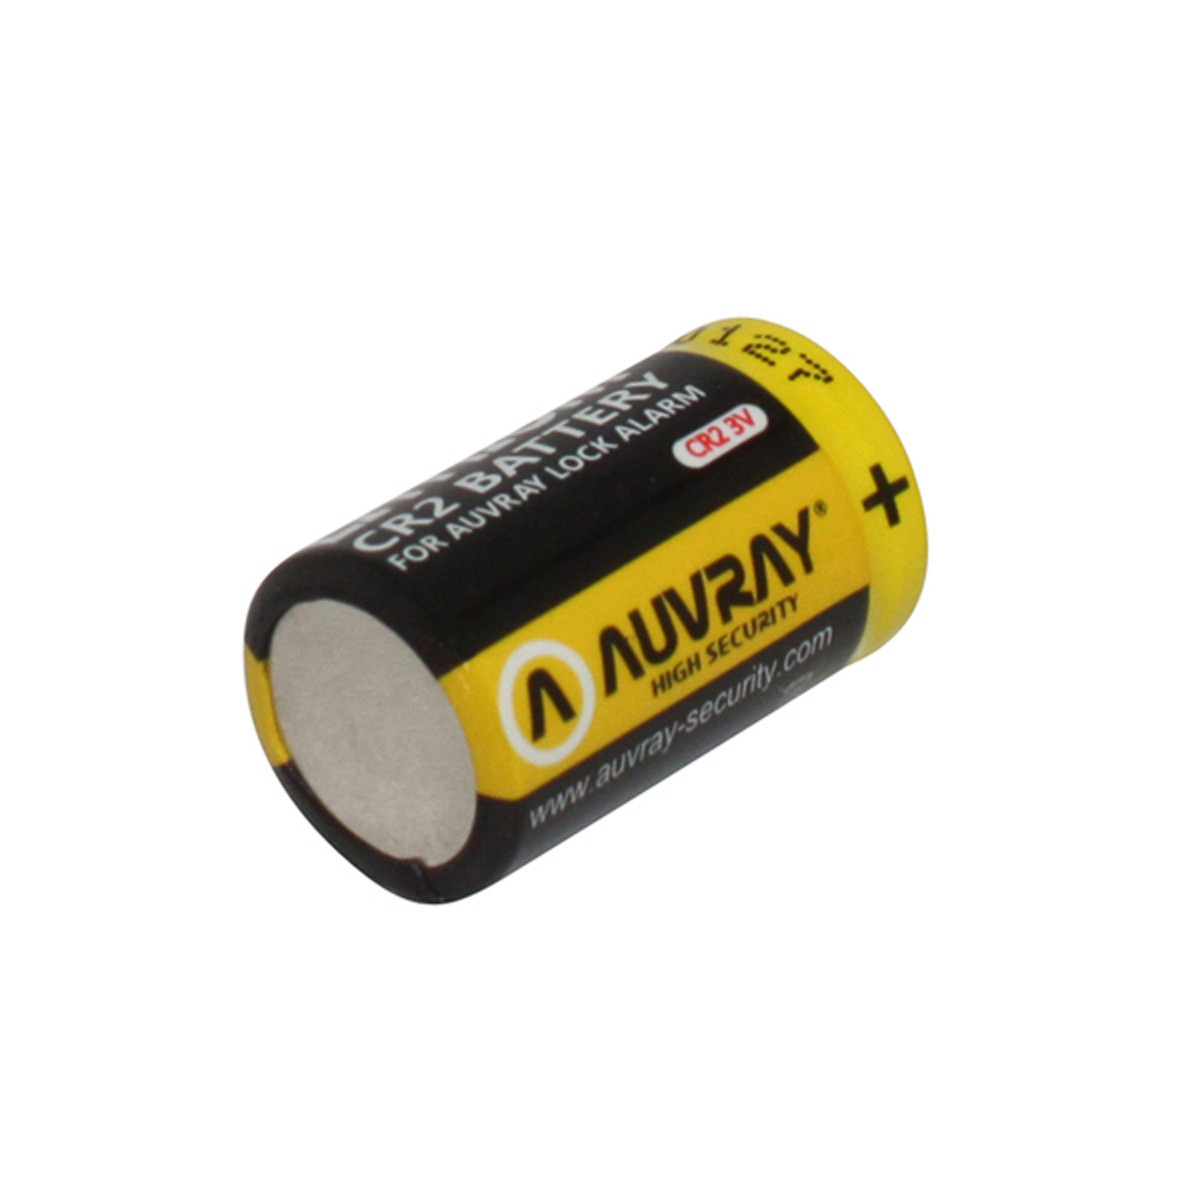 Pile CR2 3V lithium Auvray – Equipement moto